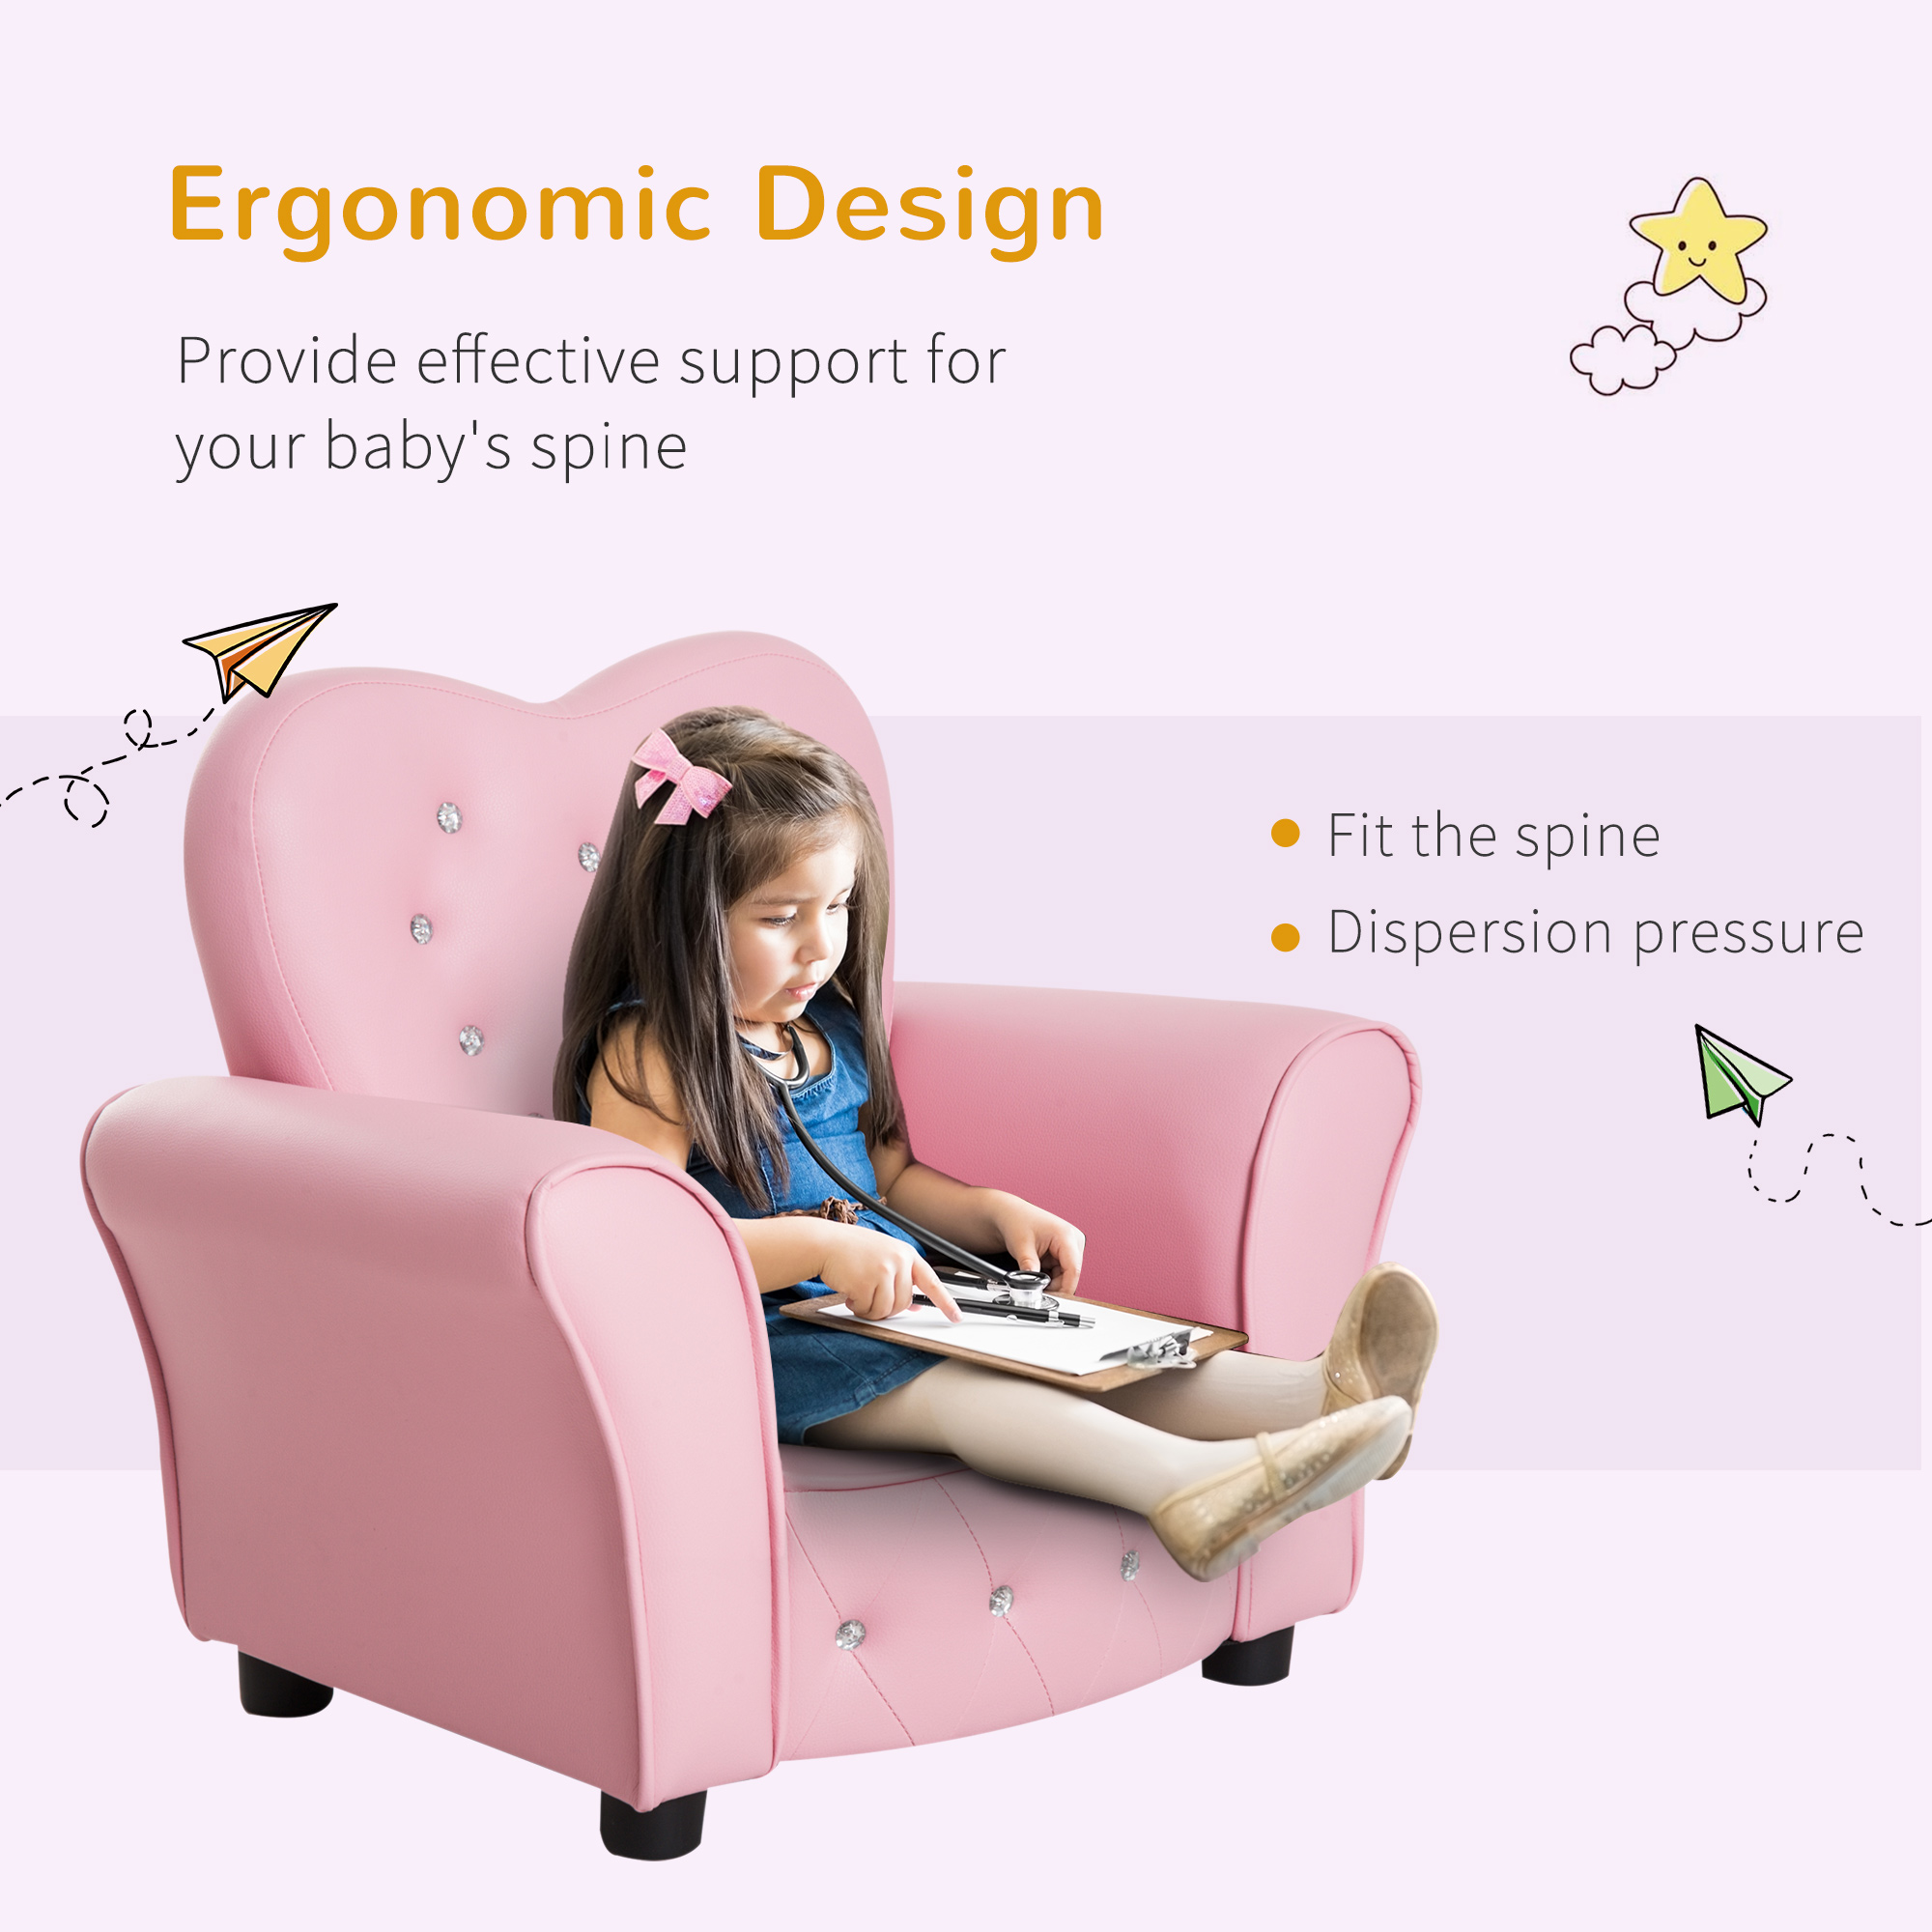 Qaba Kids Sofa Toddler Tufted Upholstered Sofa Chair Princess Couch Furniture with Diamond Decoration for Preschool Child, Pink - image 3 of 9